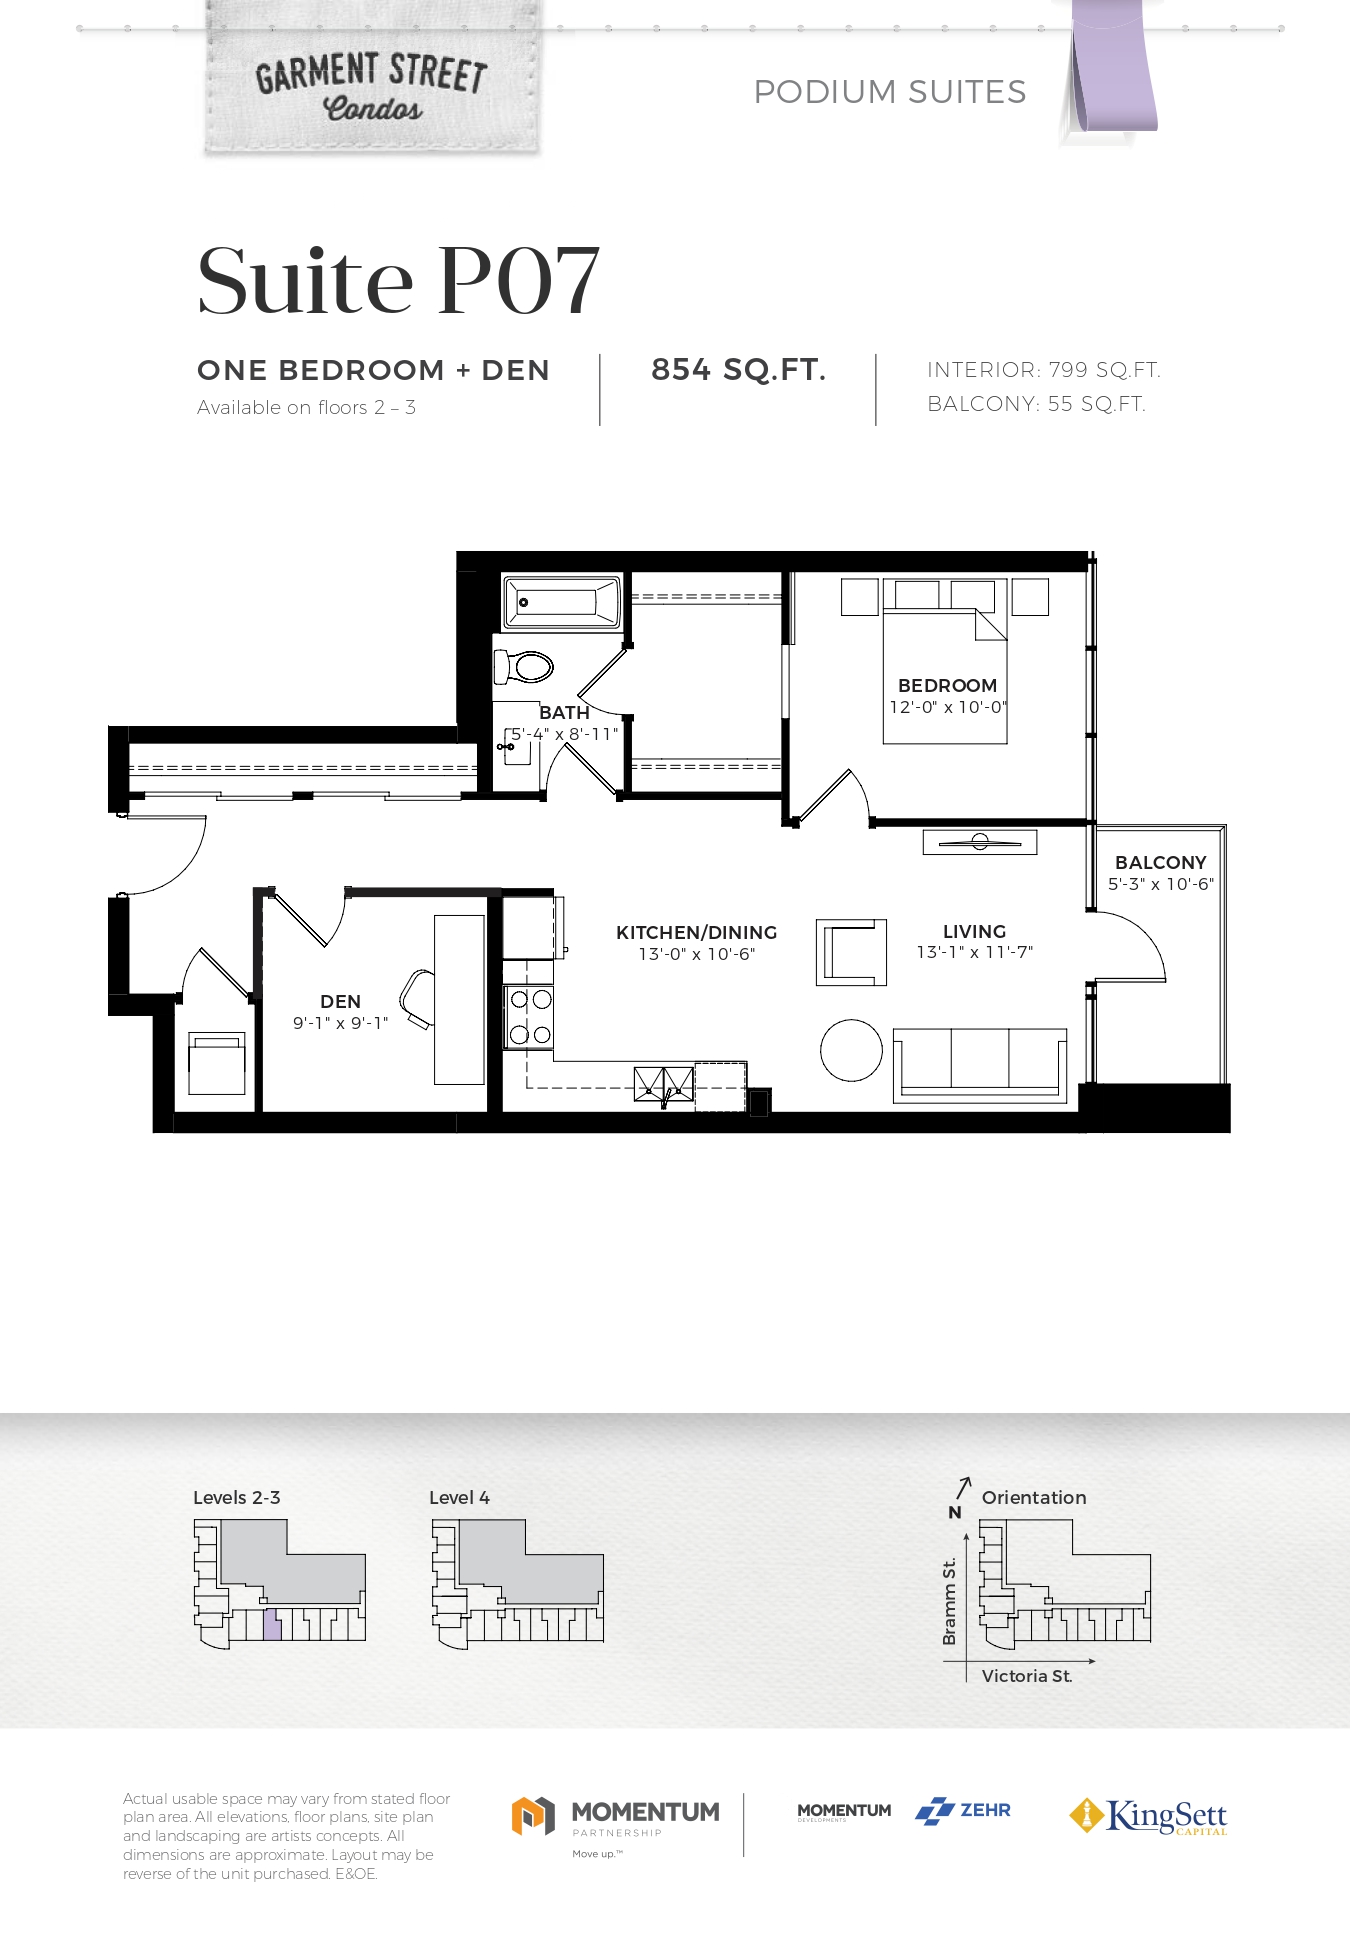  Floor Plan of Garment Street Condos with undefined beds